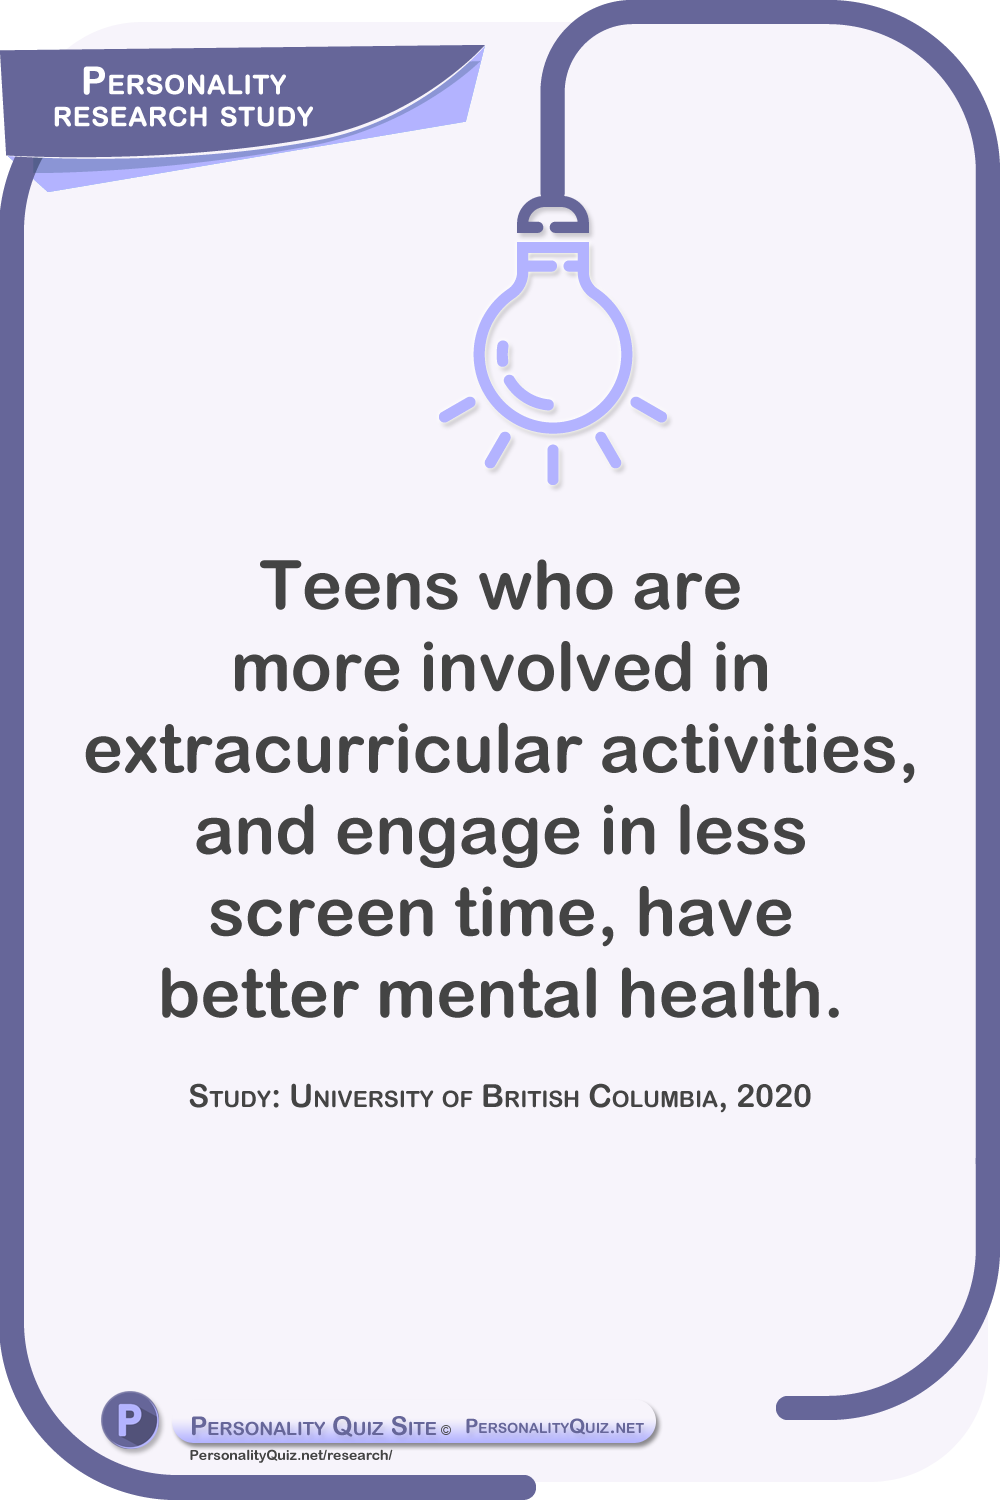 Teens who are more involved in extracurricular activities, and engage in less screen time, have better mental health. Study: University of British Columbia, 2020